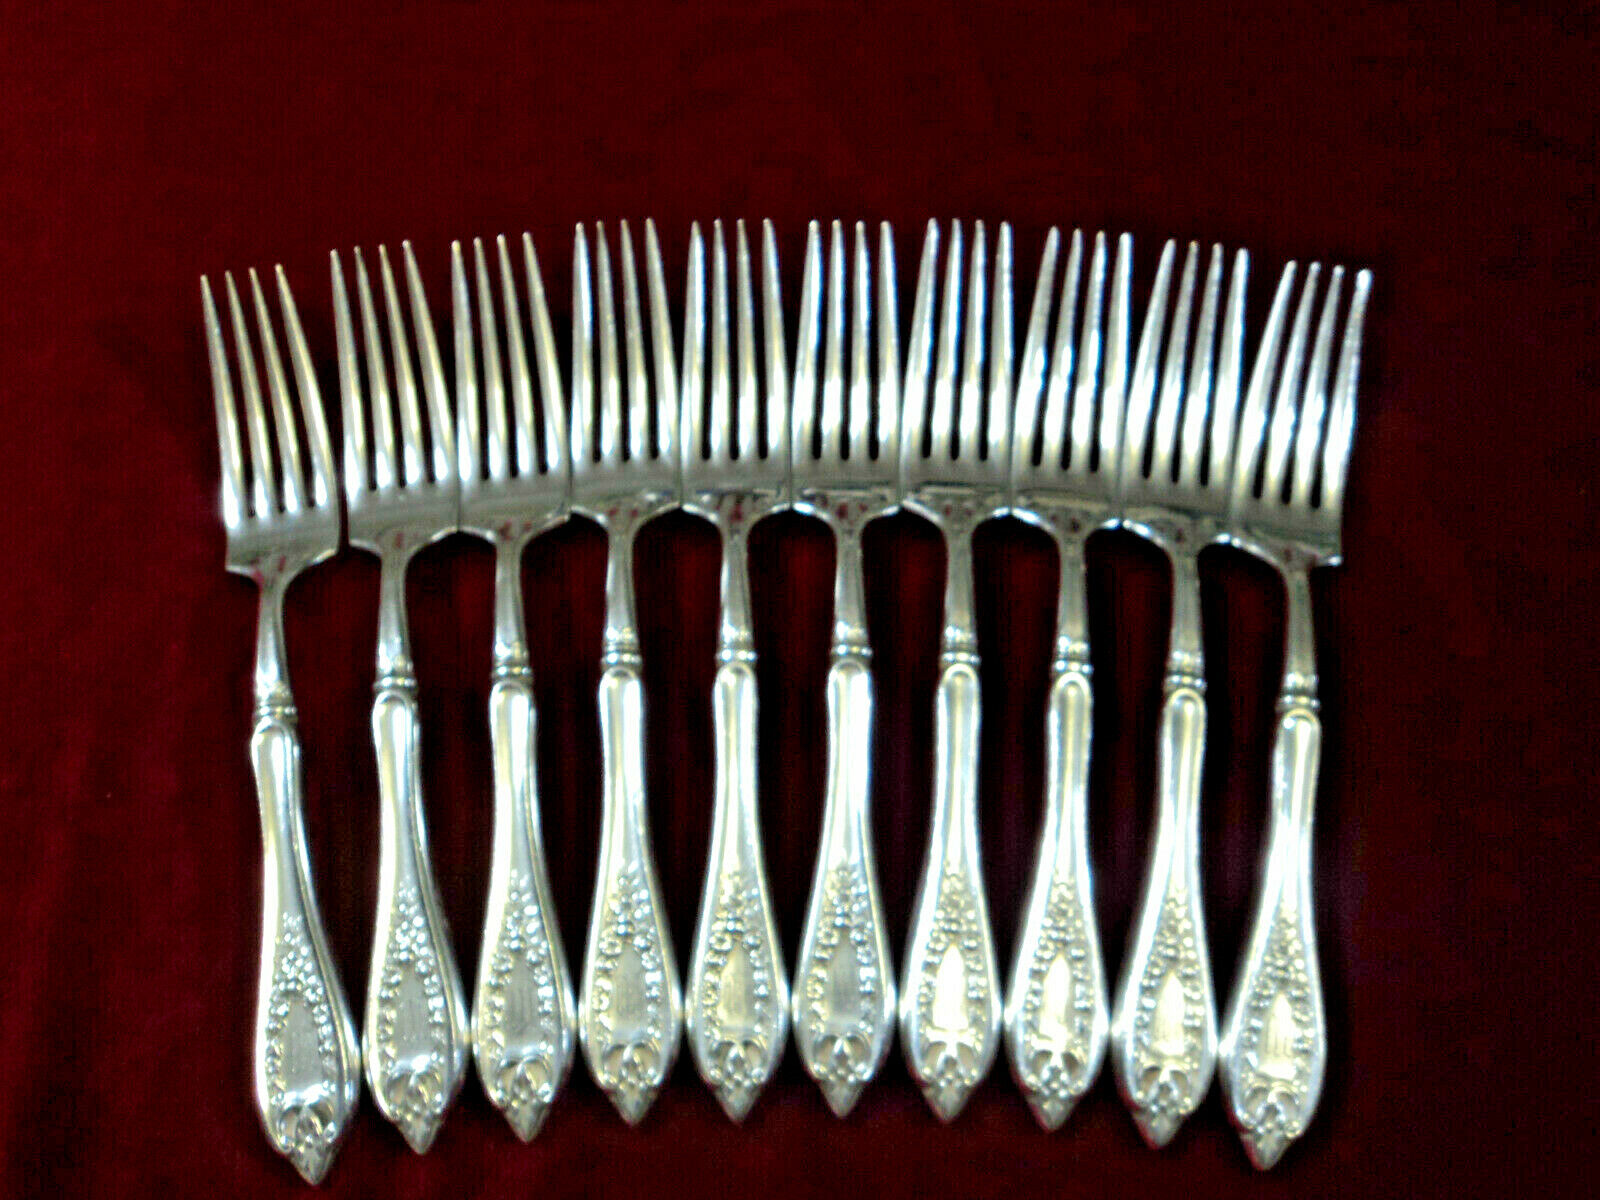 OLD COLONY Silverplate Dinner Fork Set Rogers Antique Flatware Lot of 10 Mono